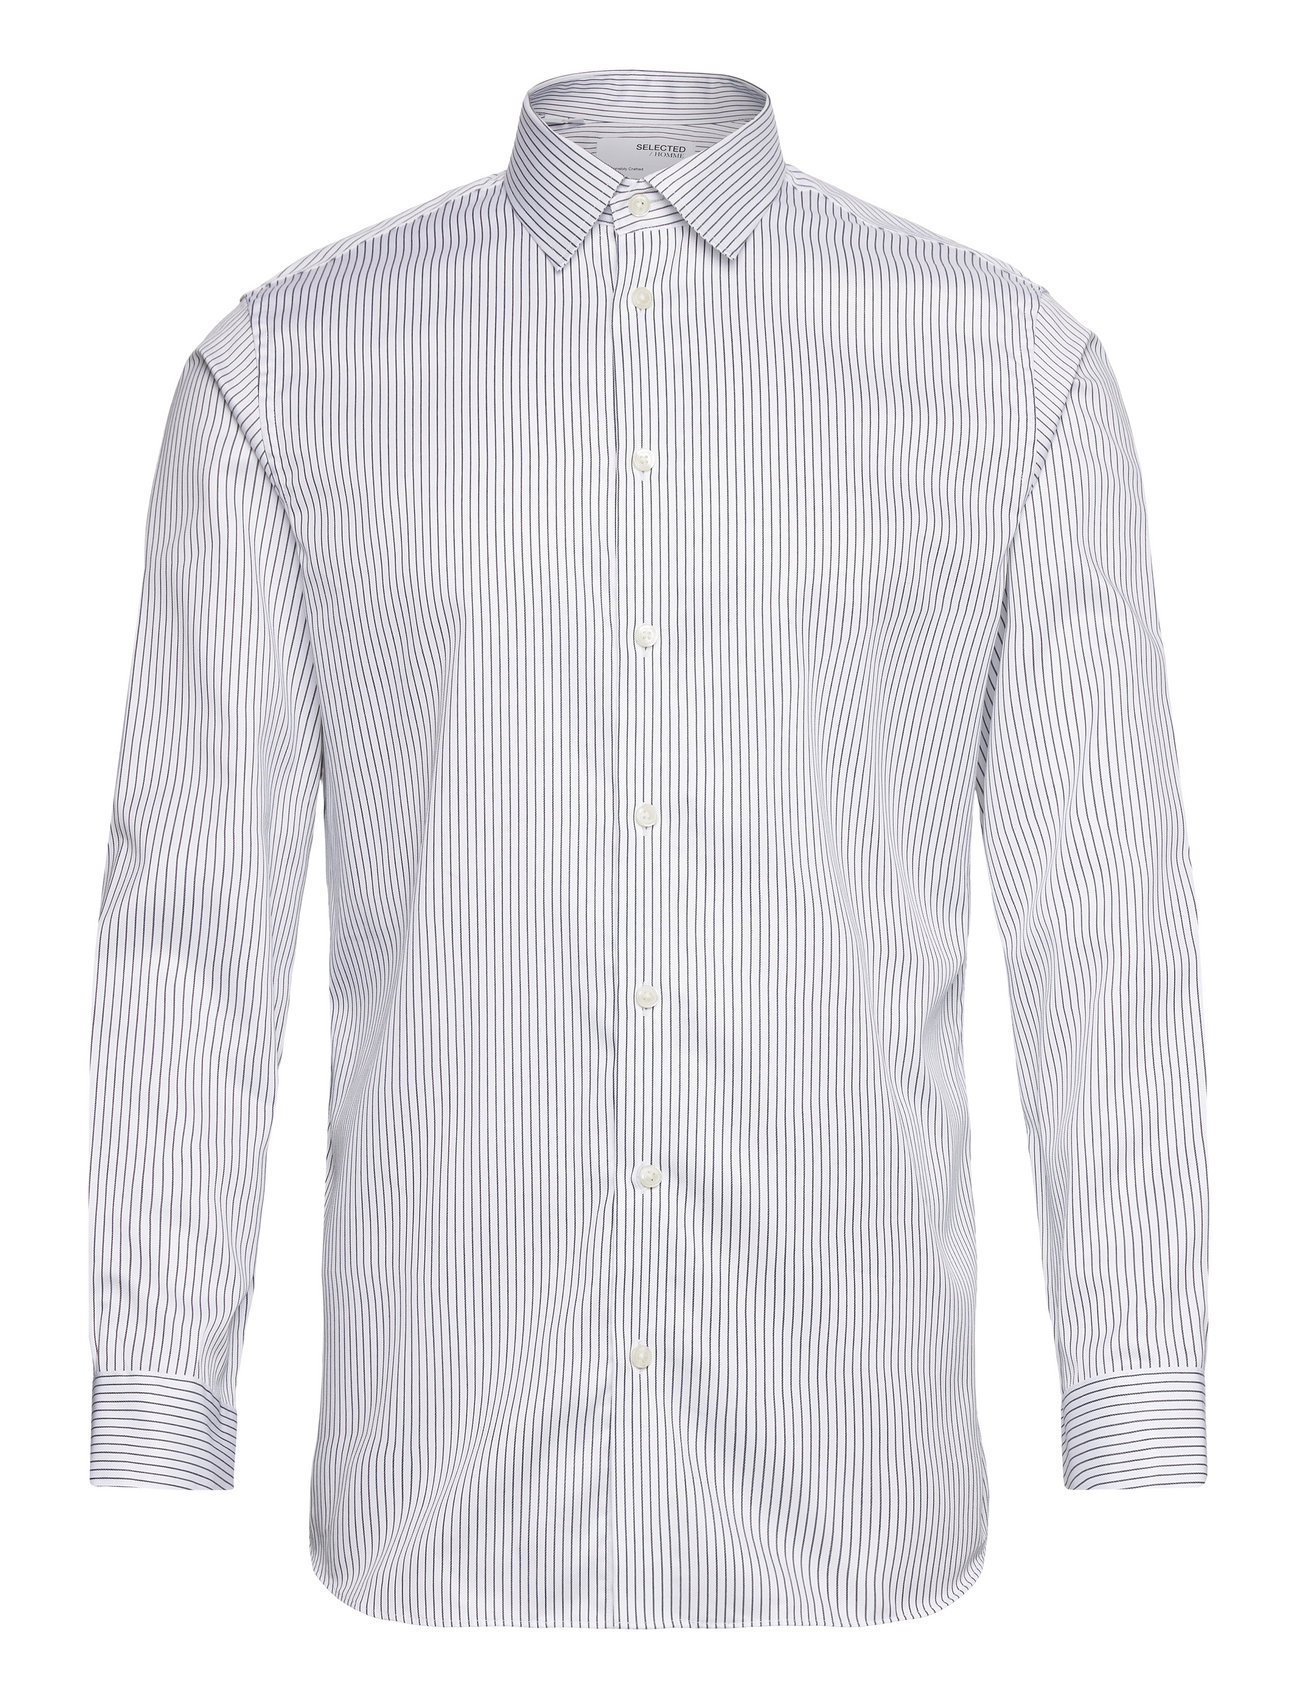 Homme – Selected – shirts at Booztlet Classic Shirt Ls shop Slhslimethan